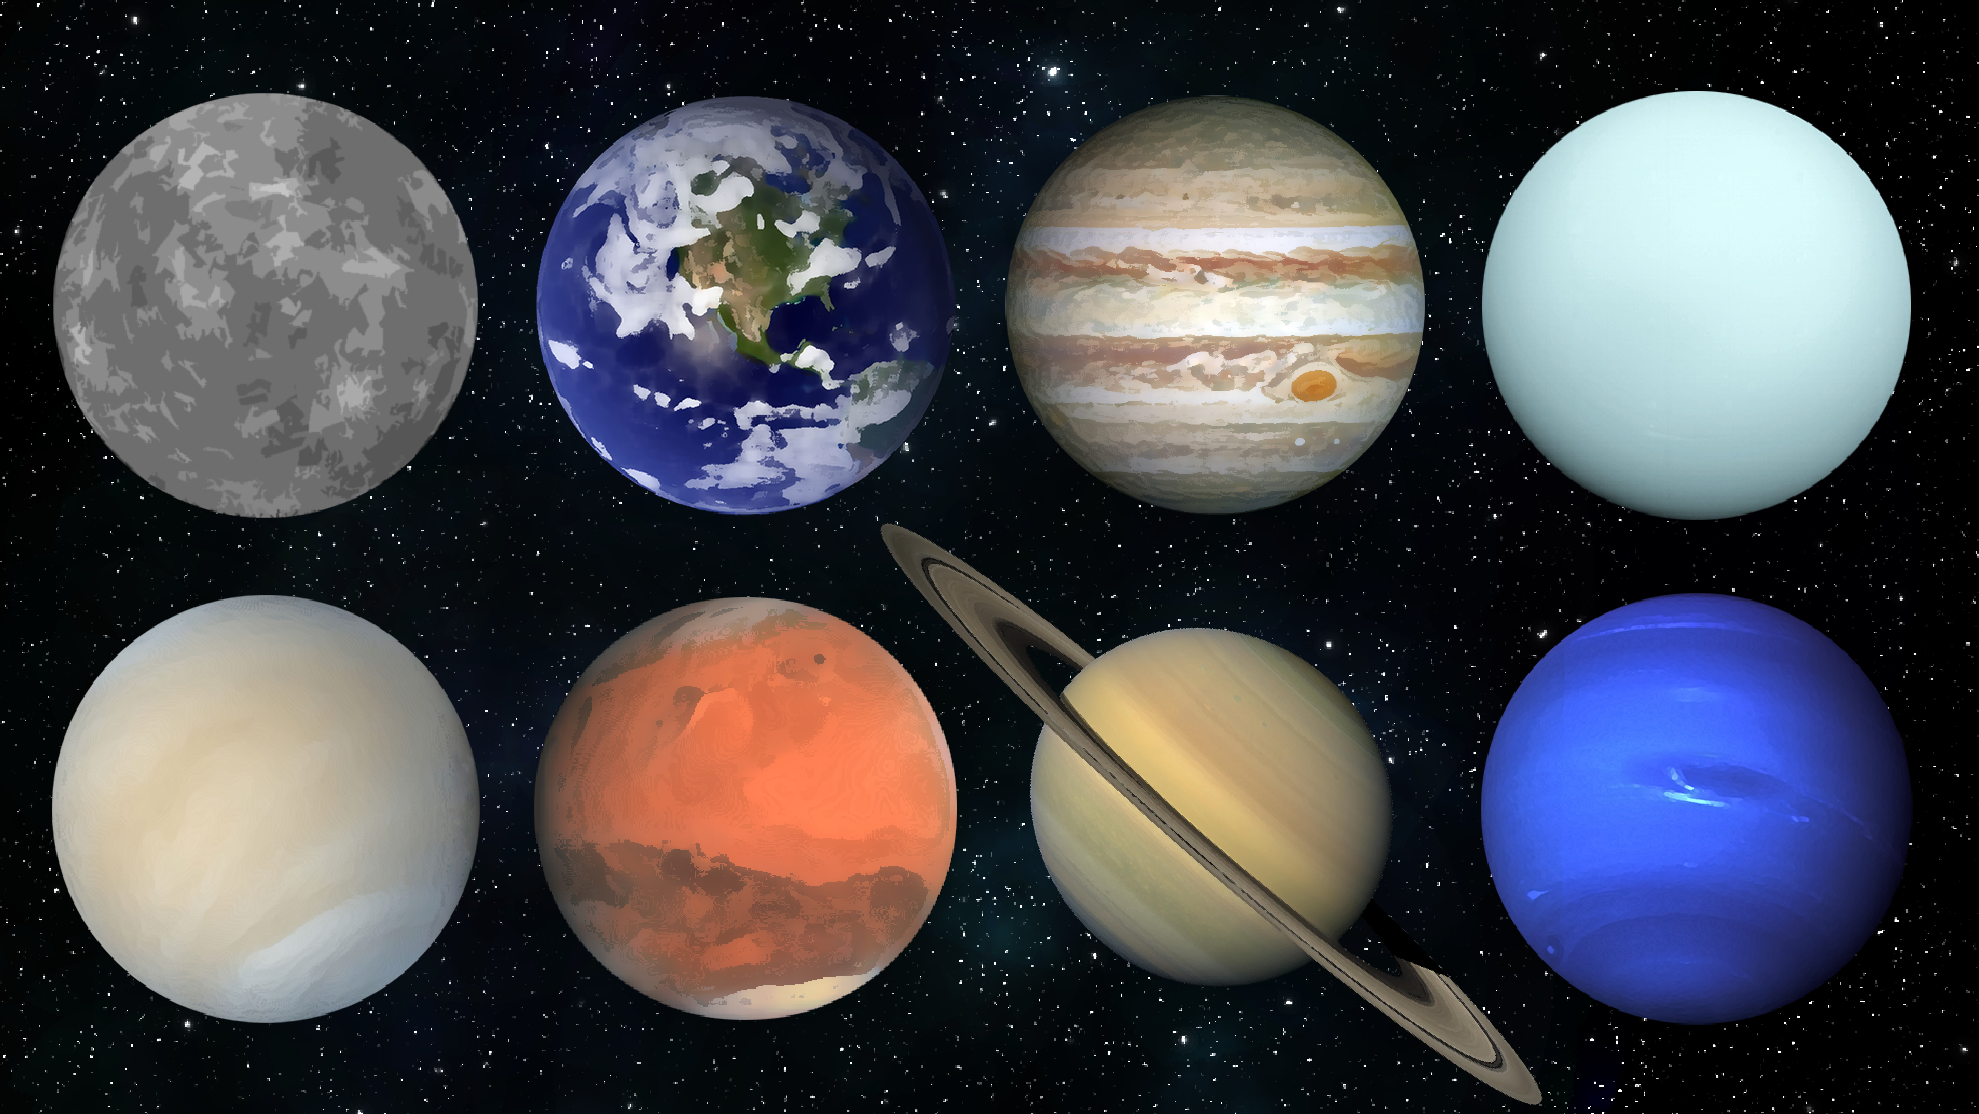 The eight planets